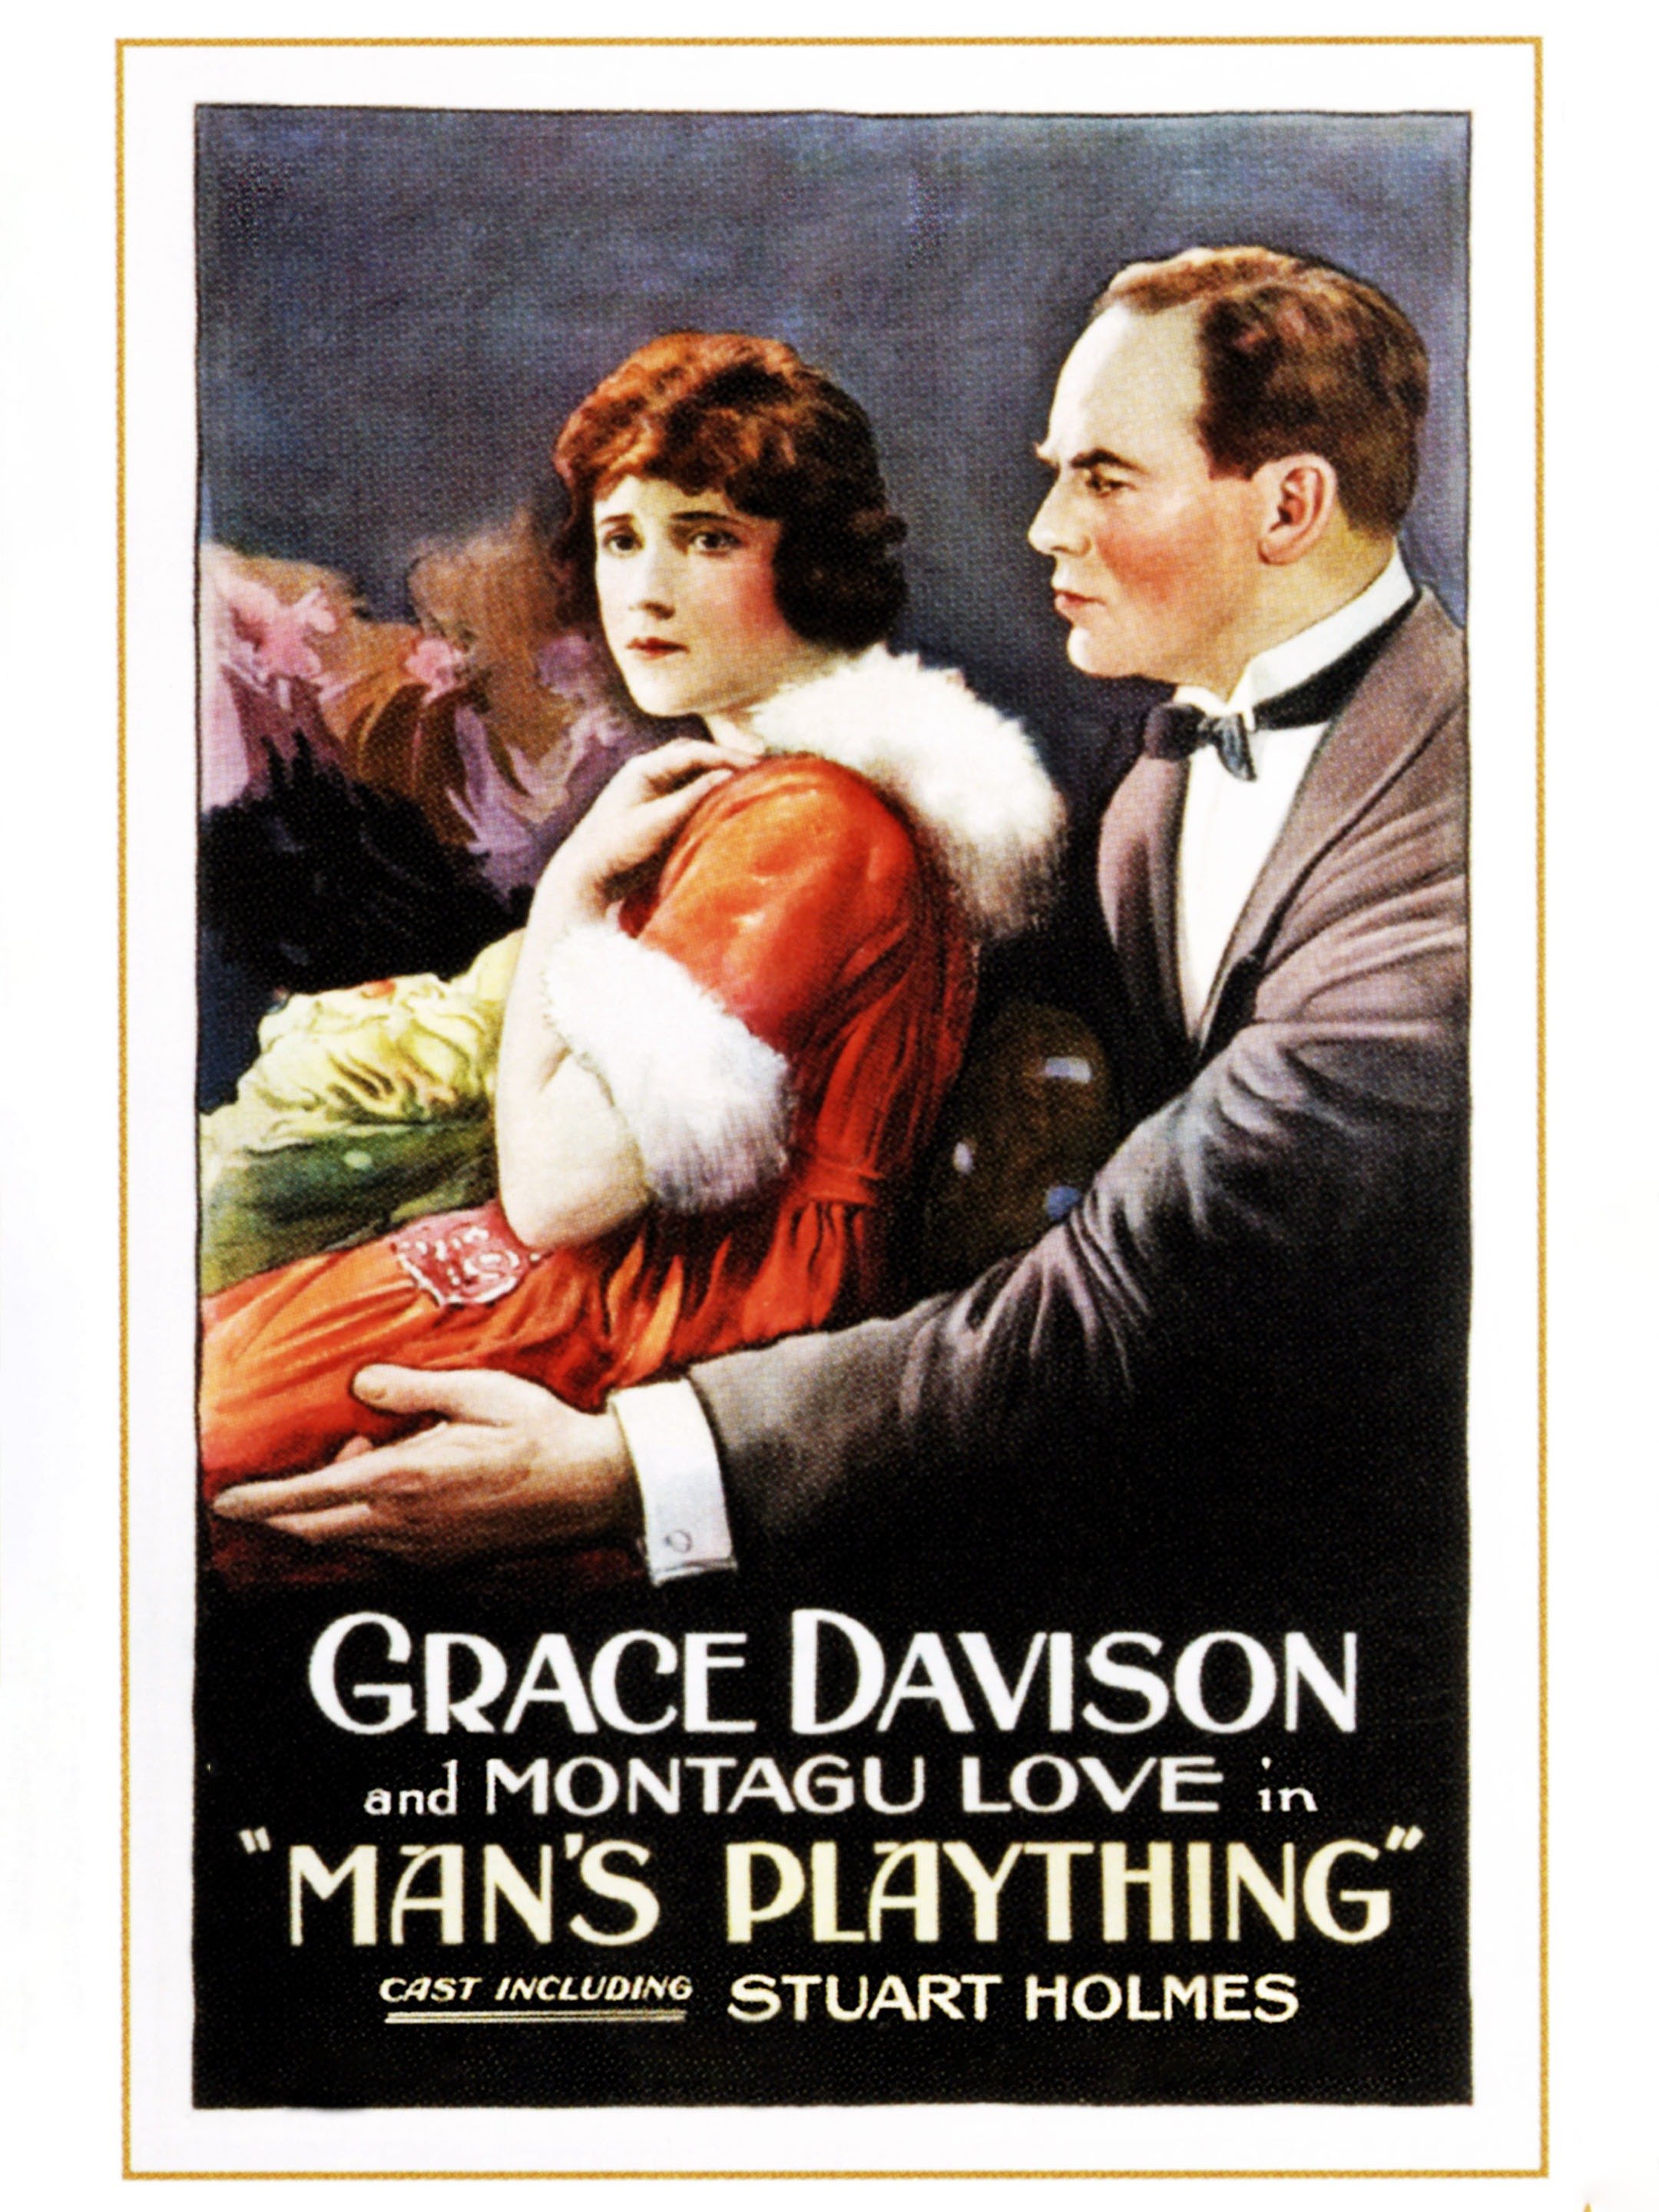 Man's Plaything Pictures - Rotten Tomatoes